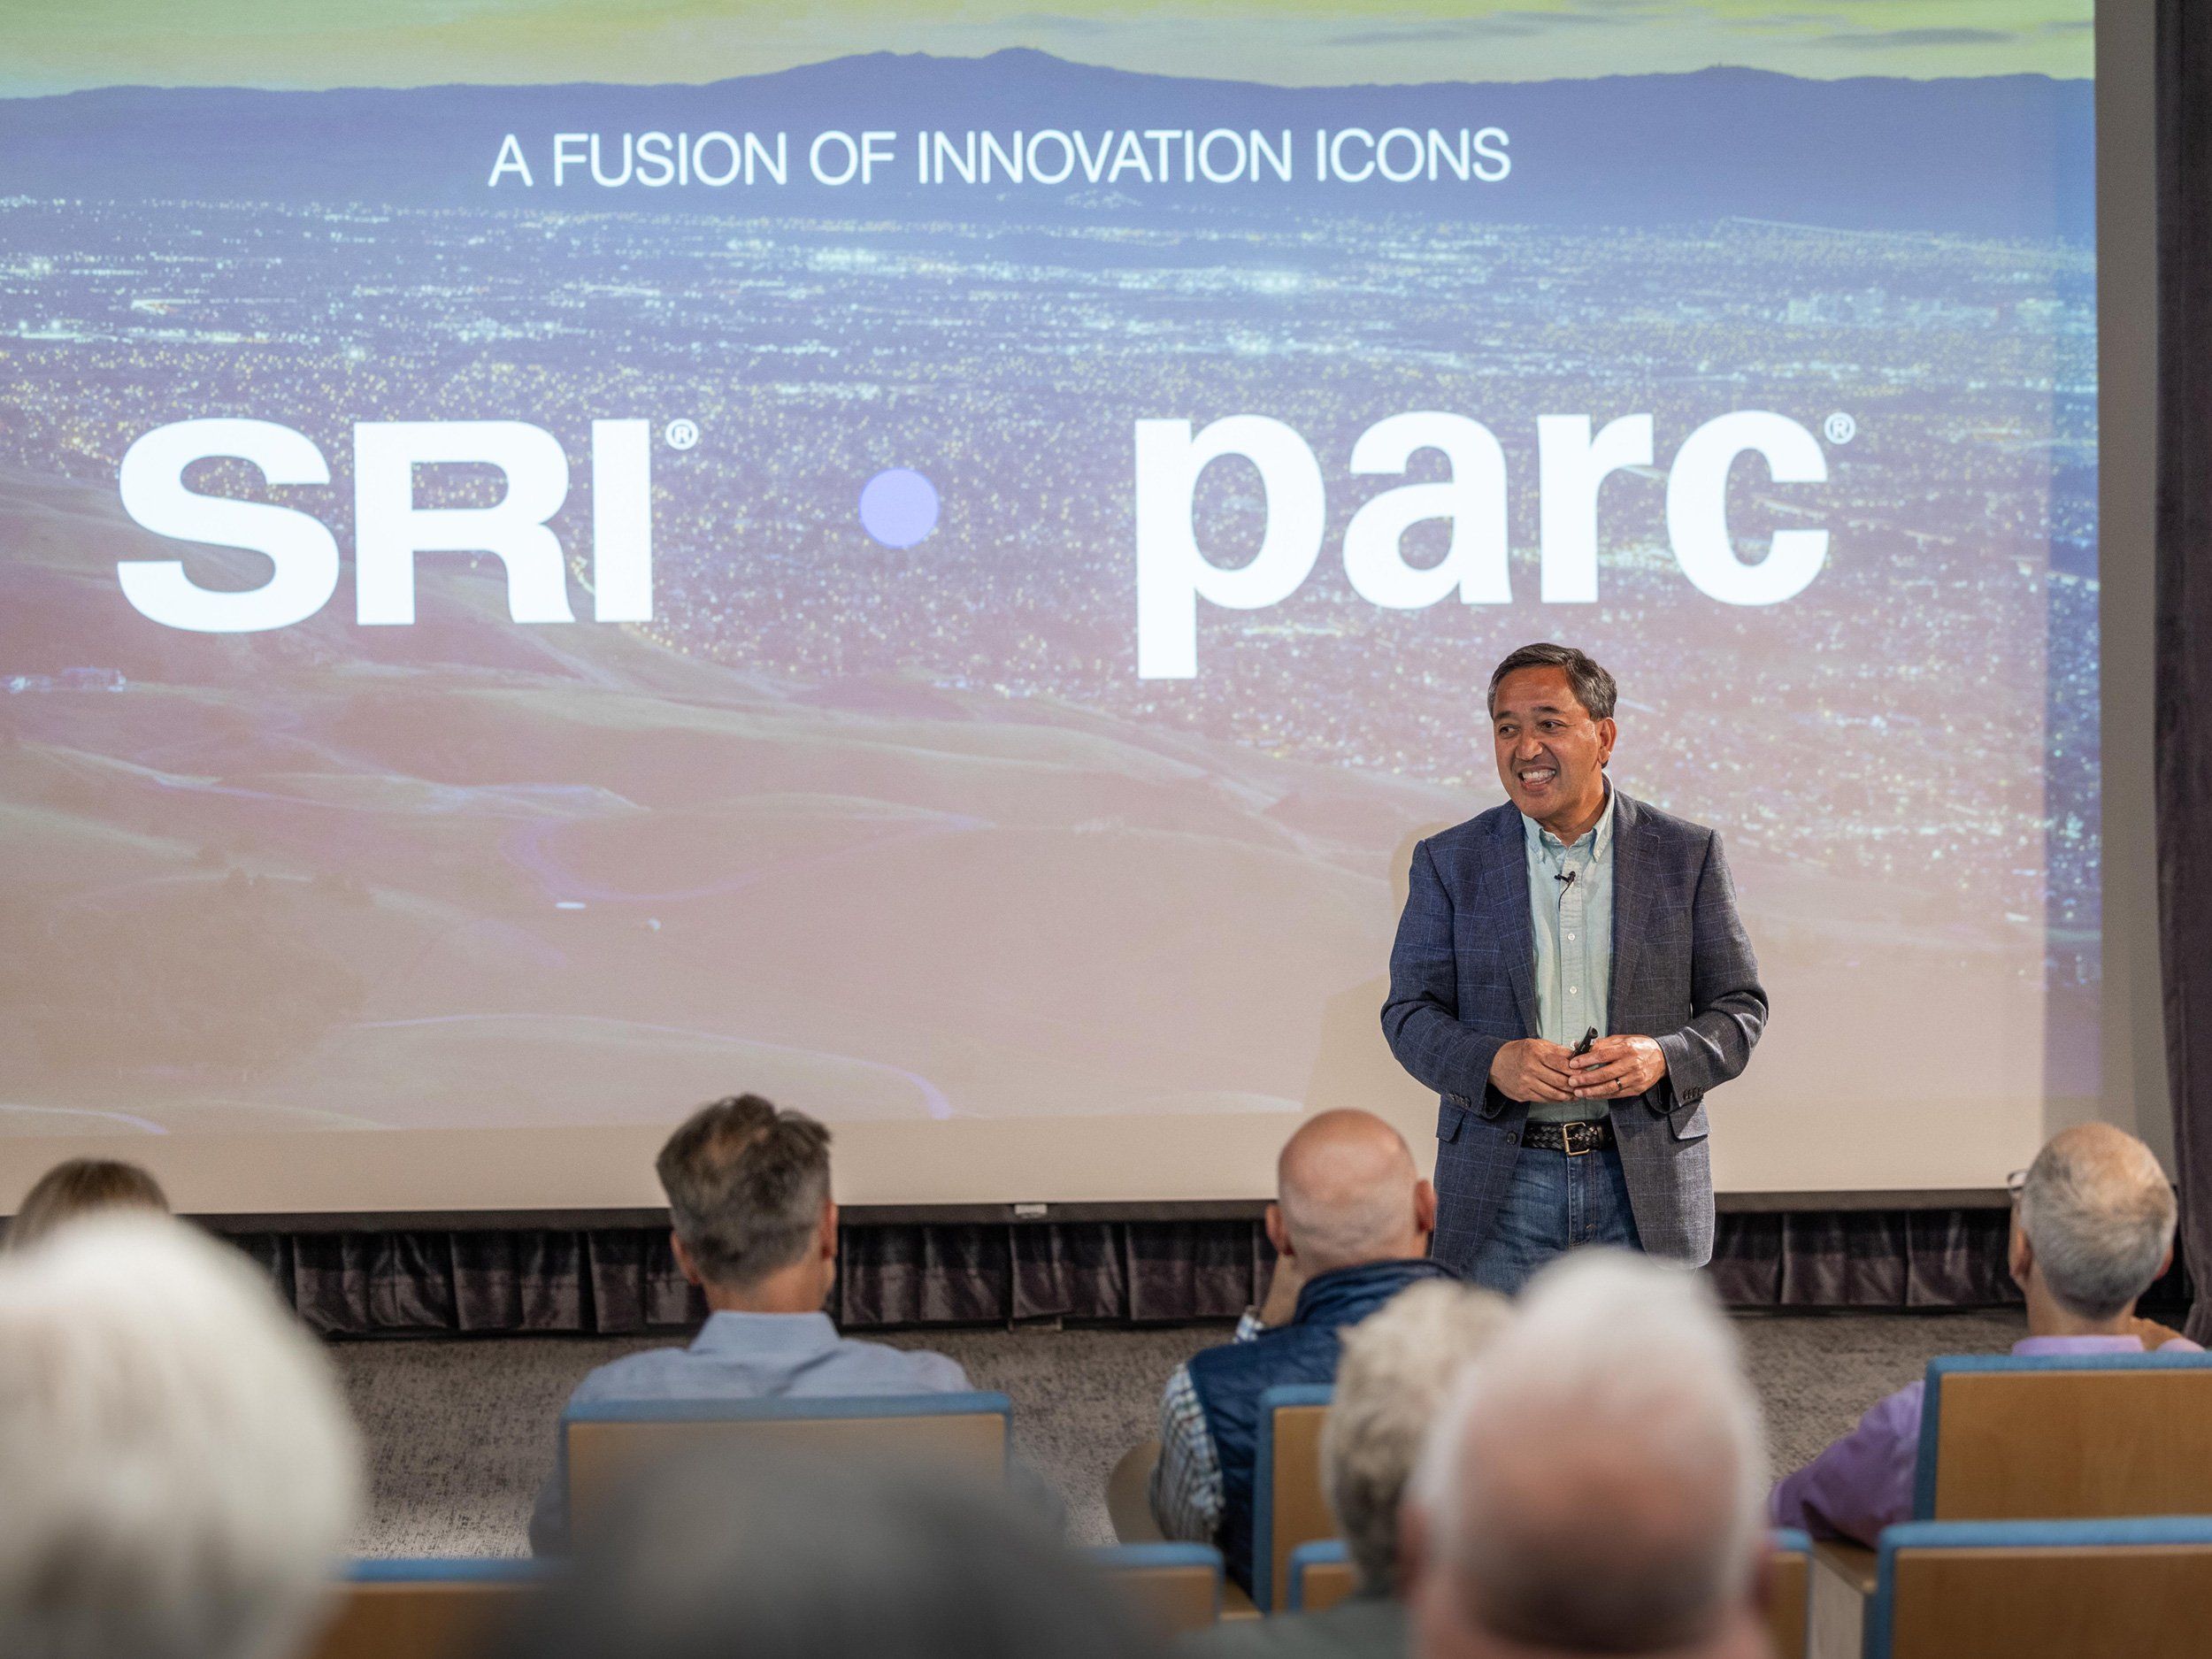 man speaking to a group of people in front of a screen that says "SRI parc" and in smaller letters "A fusion of innovation icons"